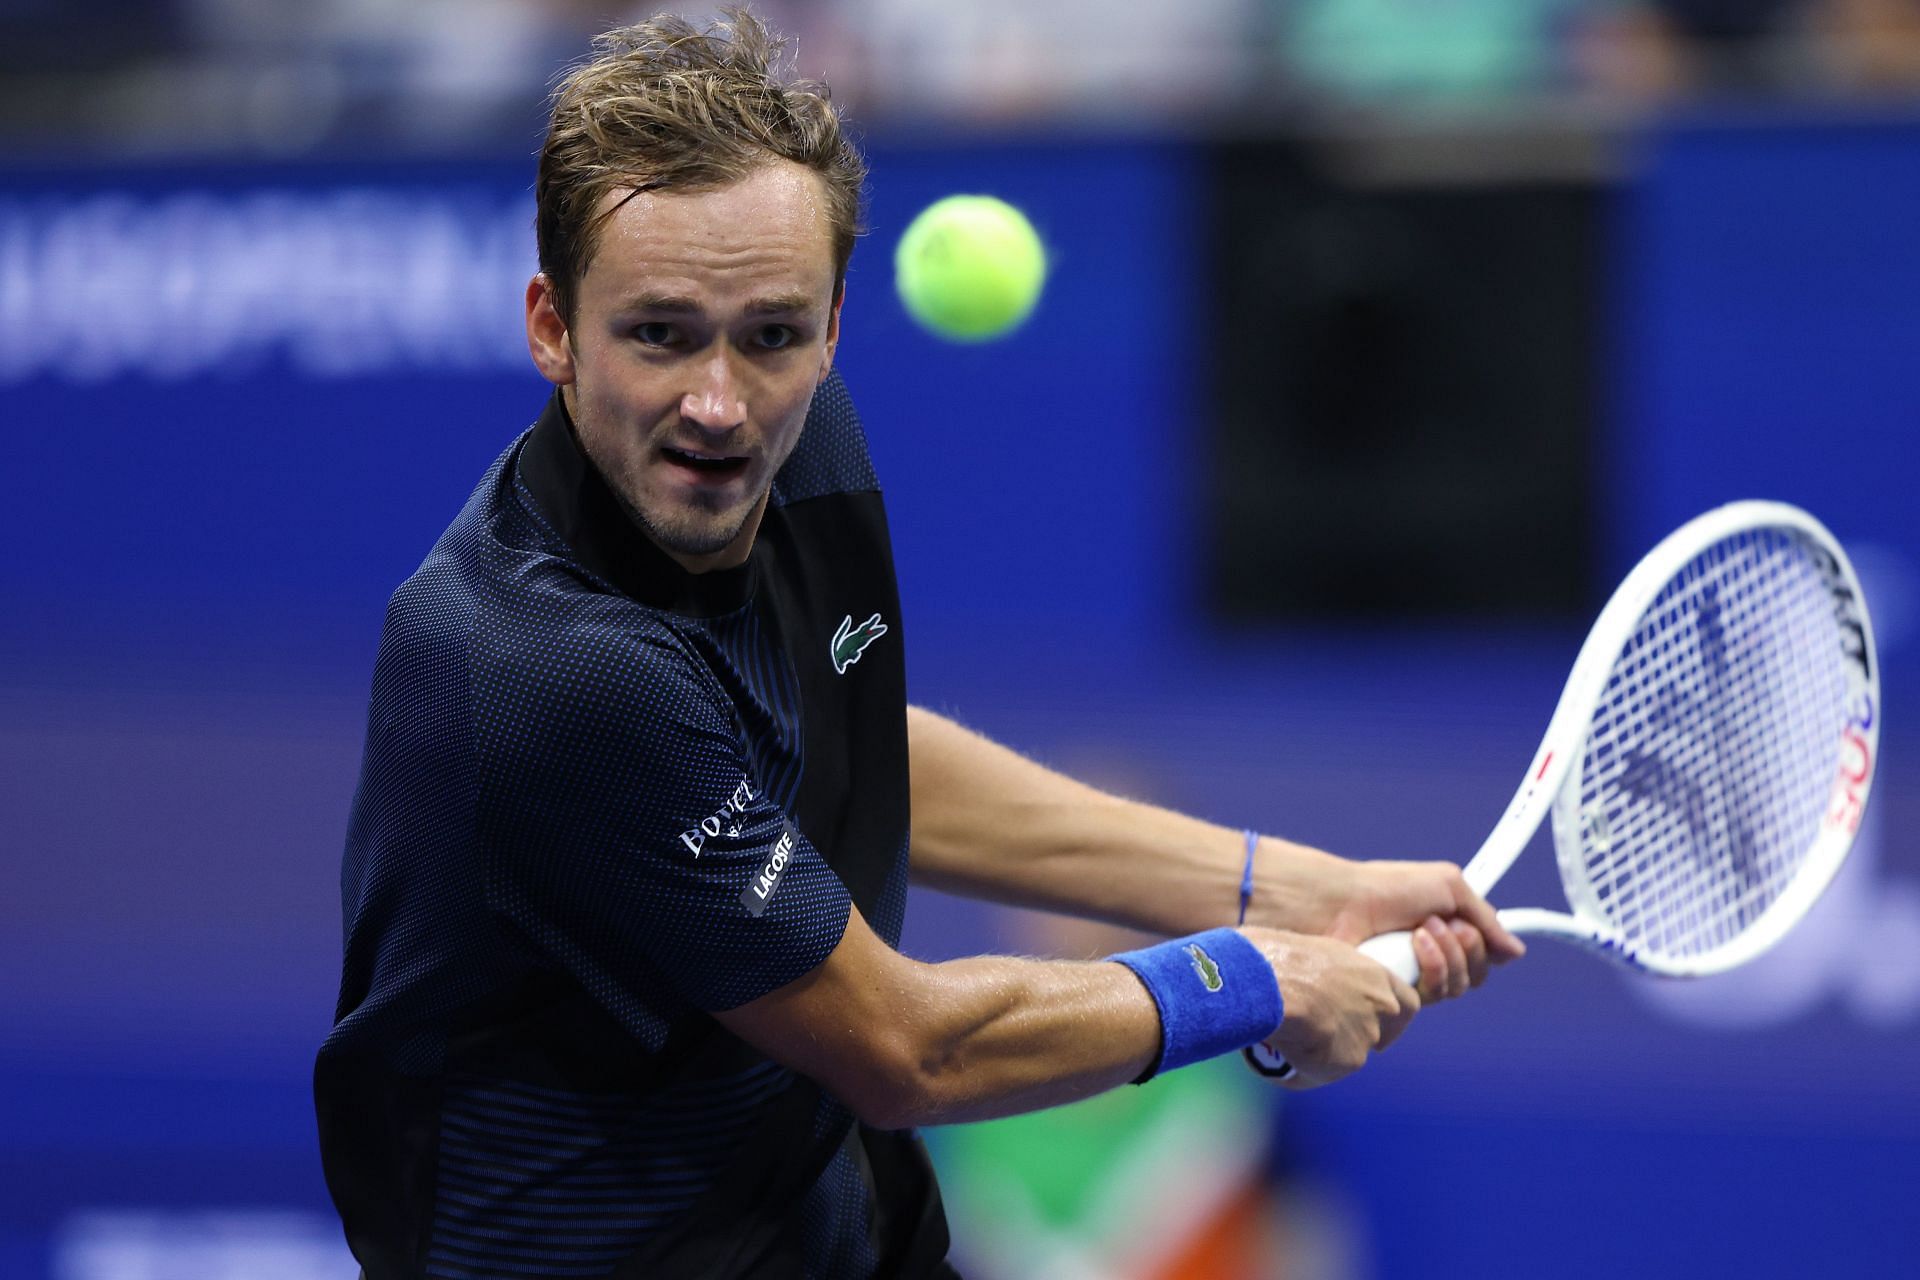 Medvedev will look to get a step closer to his title defense at the US Open